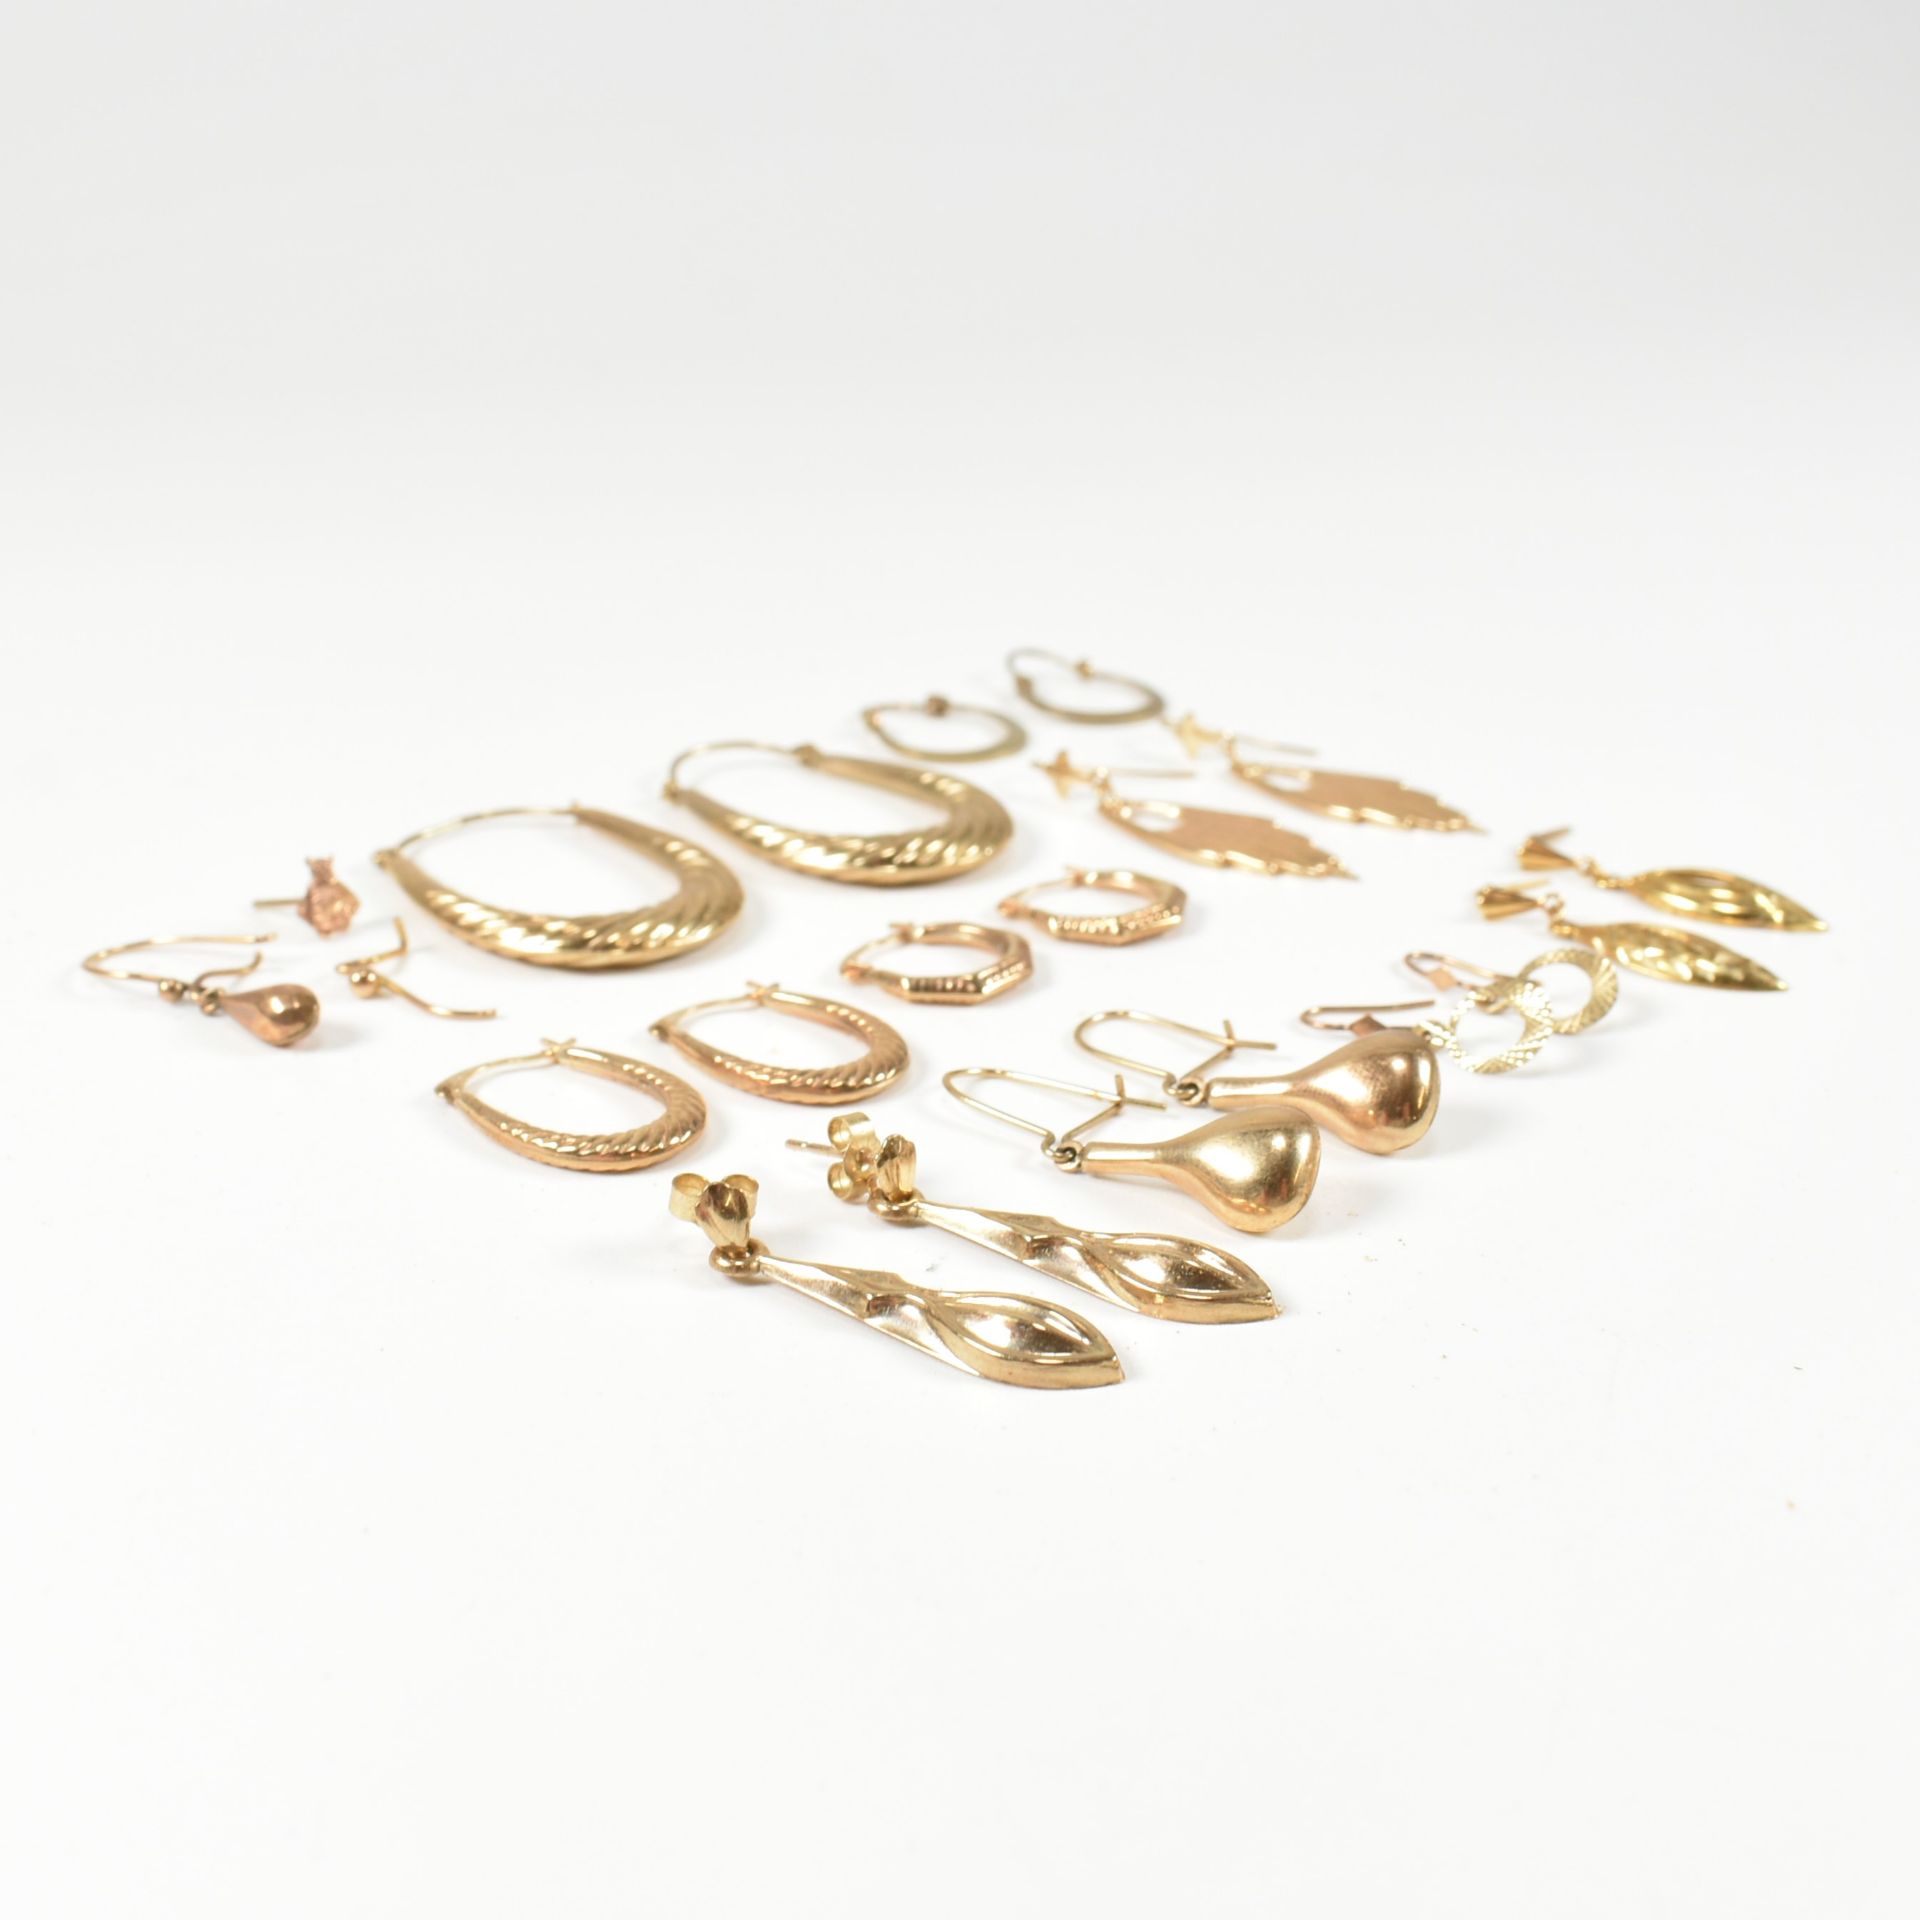 COLLECTION OF 9CT GOLD HOOP & PENDANT EARRINGS - Image 6 of 6